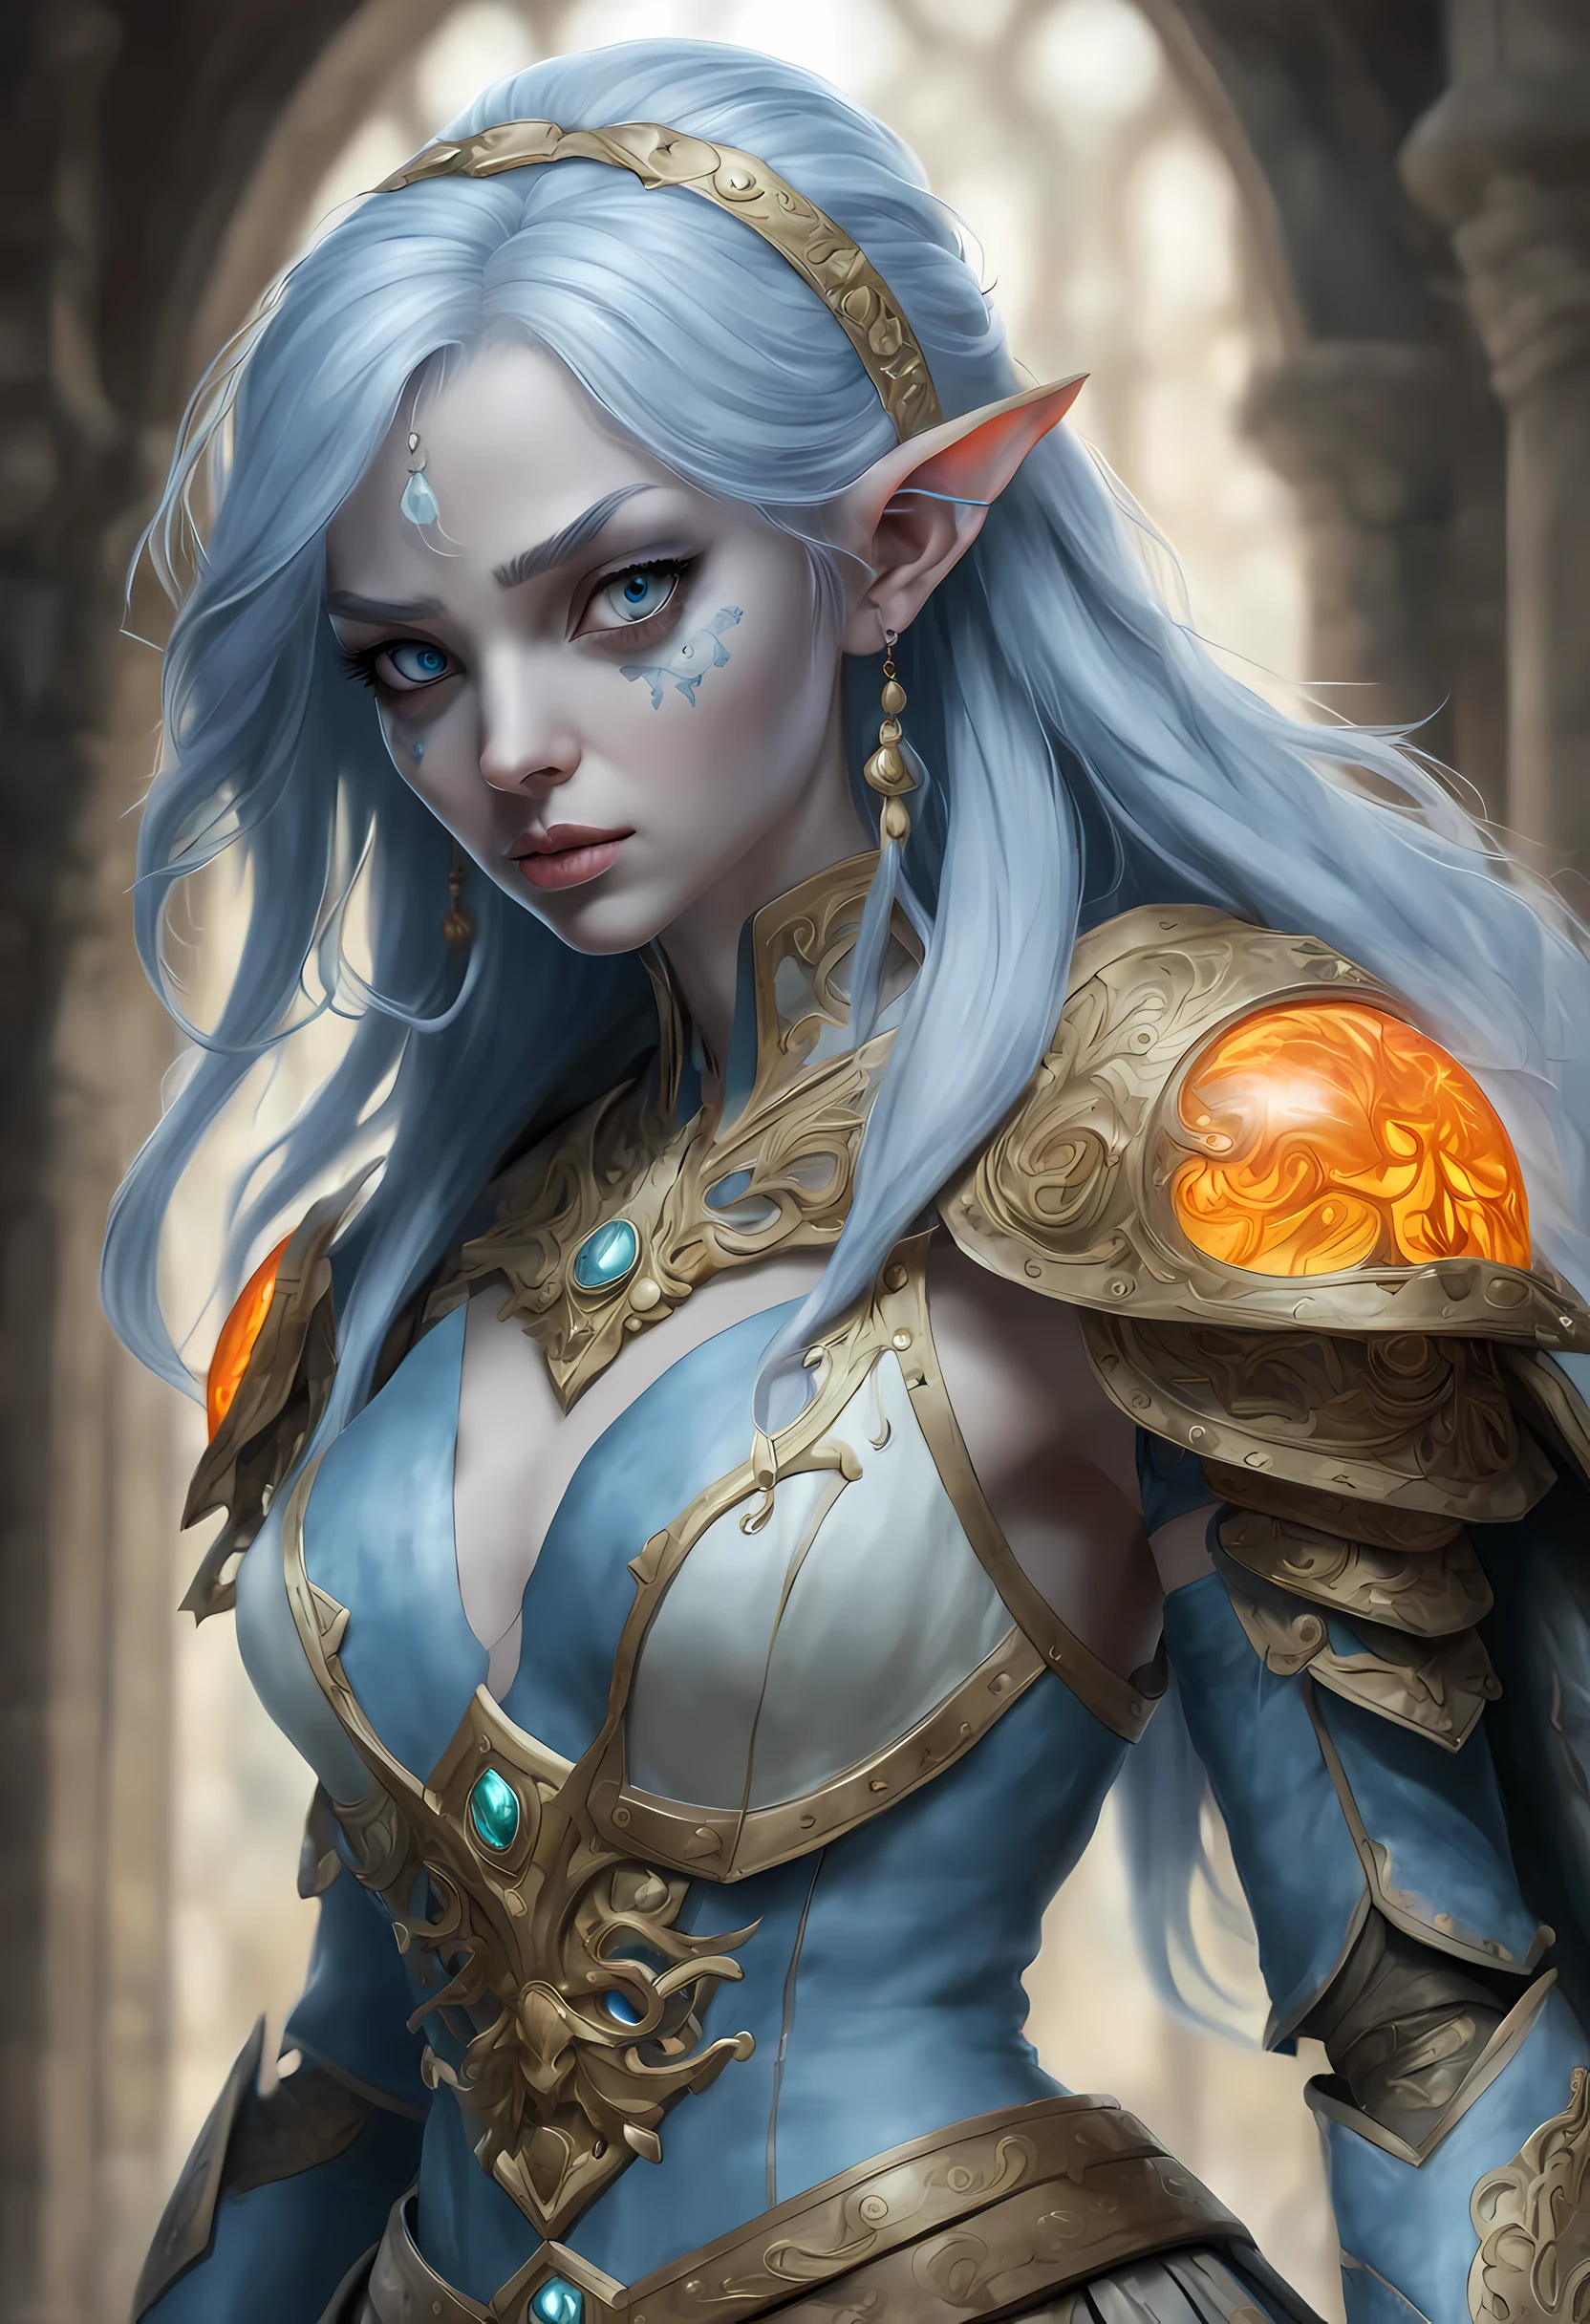 fantasy art, dnd art, RPG art, wide shot, (masterpiece: 1.4) a (portrait: 1.3) intense details, highly detailed, photorealistic, best quality, highres, portrait a female (fantasy art, Masterpiece, best quality: 1.3) ((blue skin: 1.5)), intense details facial details, exquisite beauty, (fantasy art, Masterpiece, best quality) cleric, (blue: 1.3) skinned female, white hair, long hair, (hair hides ears: 1.5), (green: 1.3) eye, fantasy art, Masterpiece, best quality) armed a fiery sword red fire, wearing heavy (white: 1.3) half plate mail armor, wearing high heeled laced boots, wearing an(orange :1.3) cloak, wearing glowing holy symbol GlowingRunes_yellow, within fantasy temple background, reflection light, high details, best quality, 16k, [ultra detailed], masterpiece, best quality, (extremely detailed), close up, photorealistic, RAW, fantasy art, dnd art, fantasy art, realistic art,((best quality)), ((masterpiece)), (detailed), perfect face,